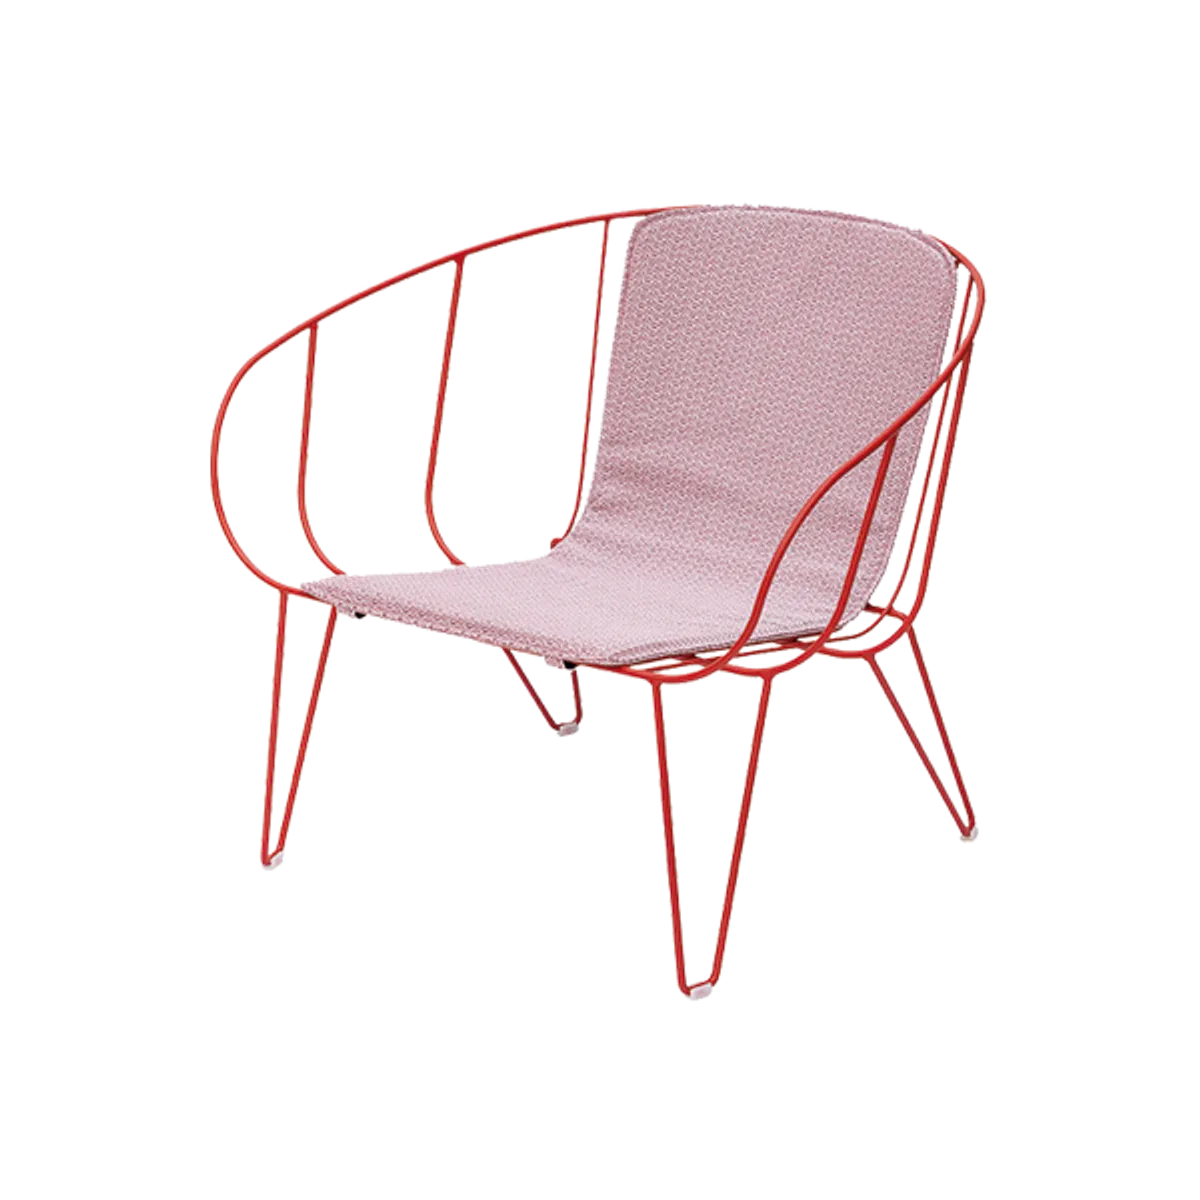 Web Cava Lounge Chair In Red Metal With Seat Cushion Furniture For Outdoor Hotel Gardens And Restaurants Insideoutcontracts